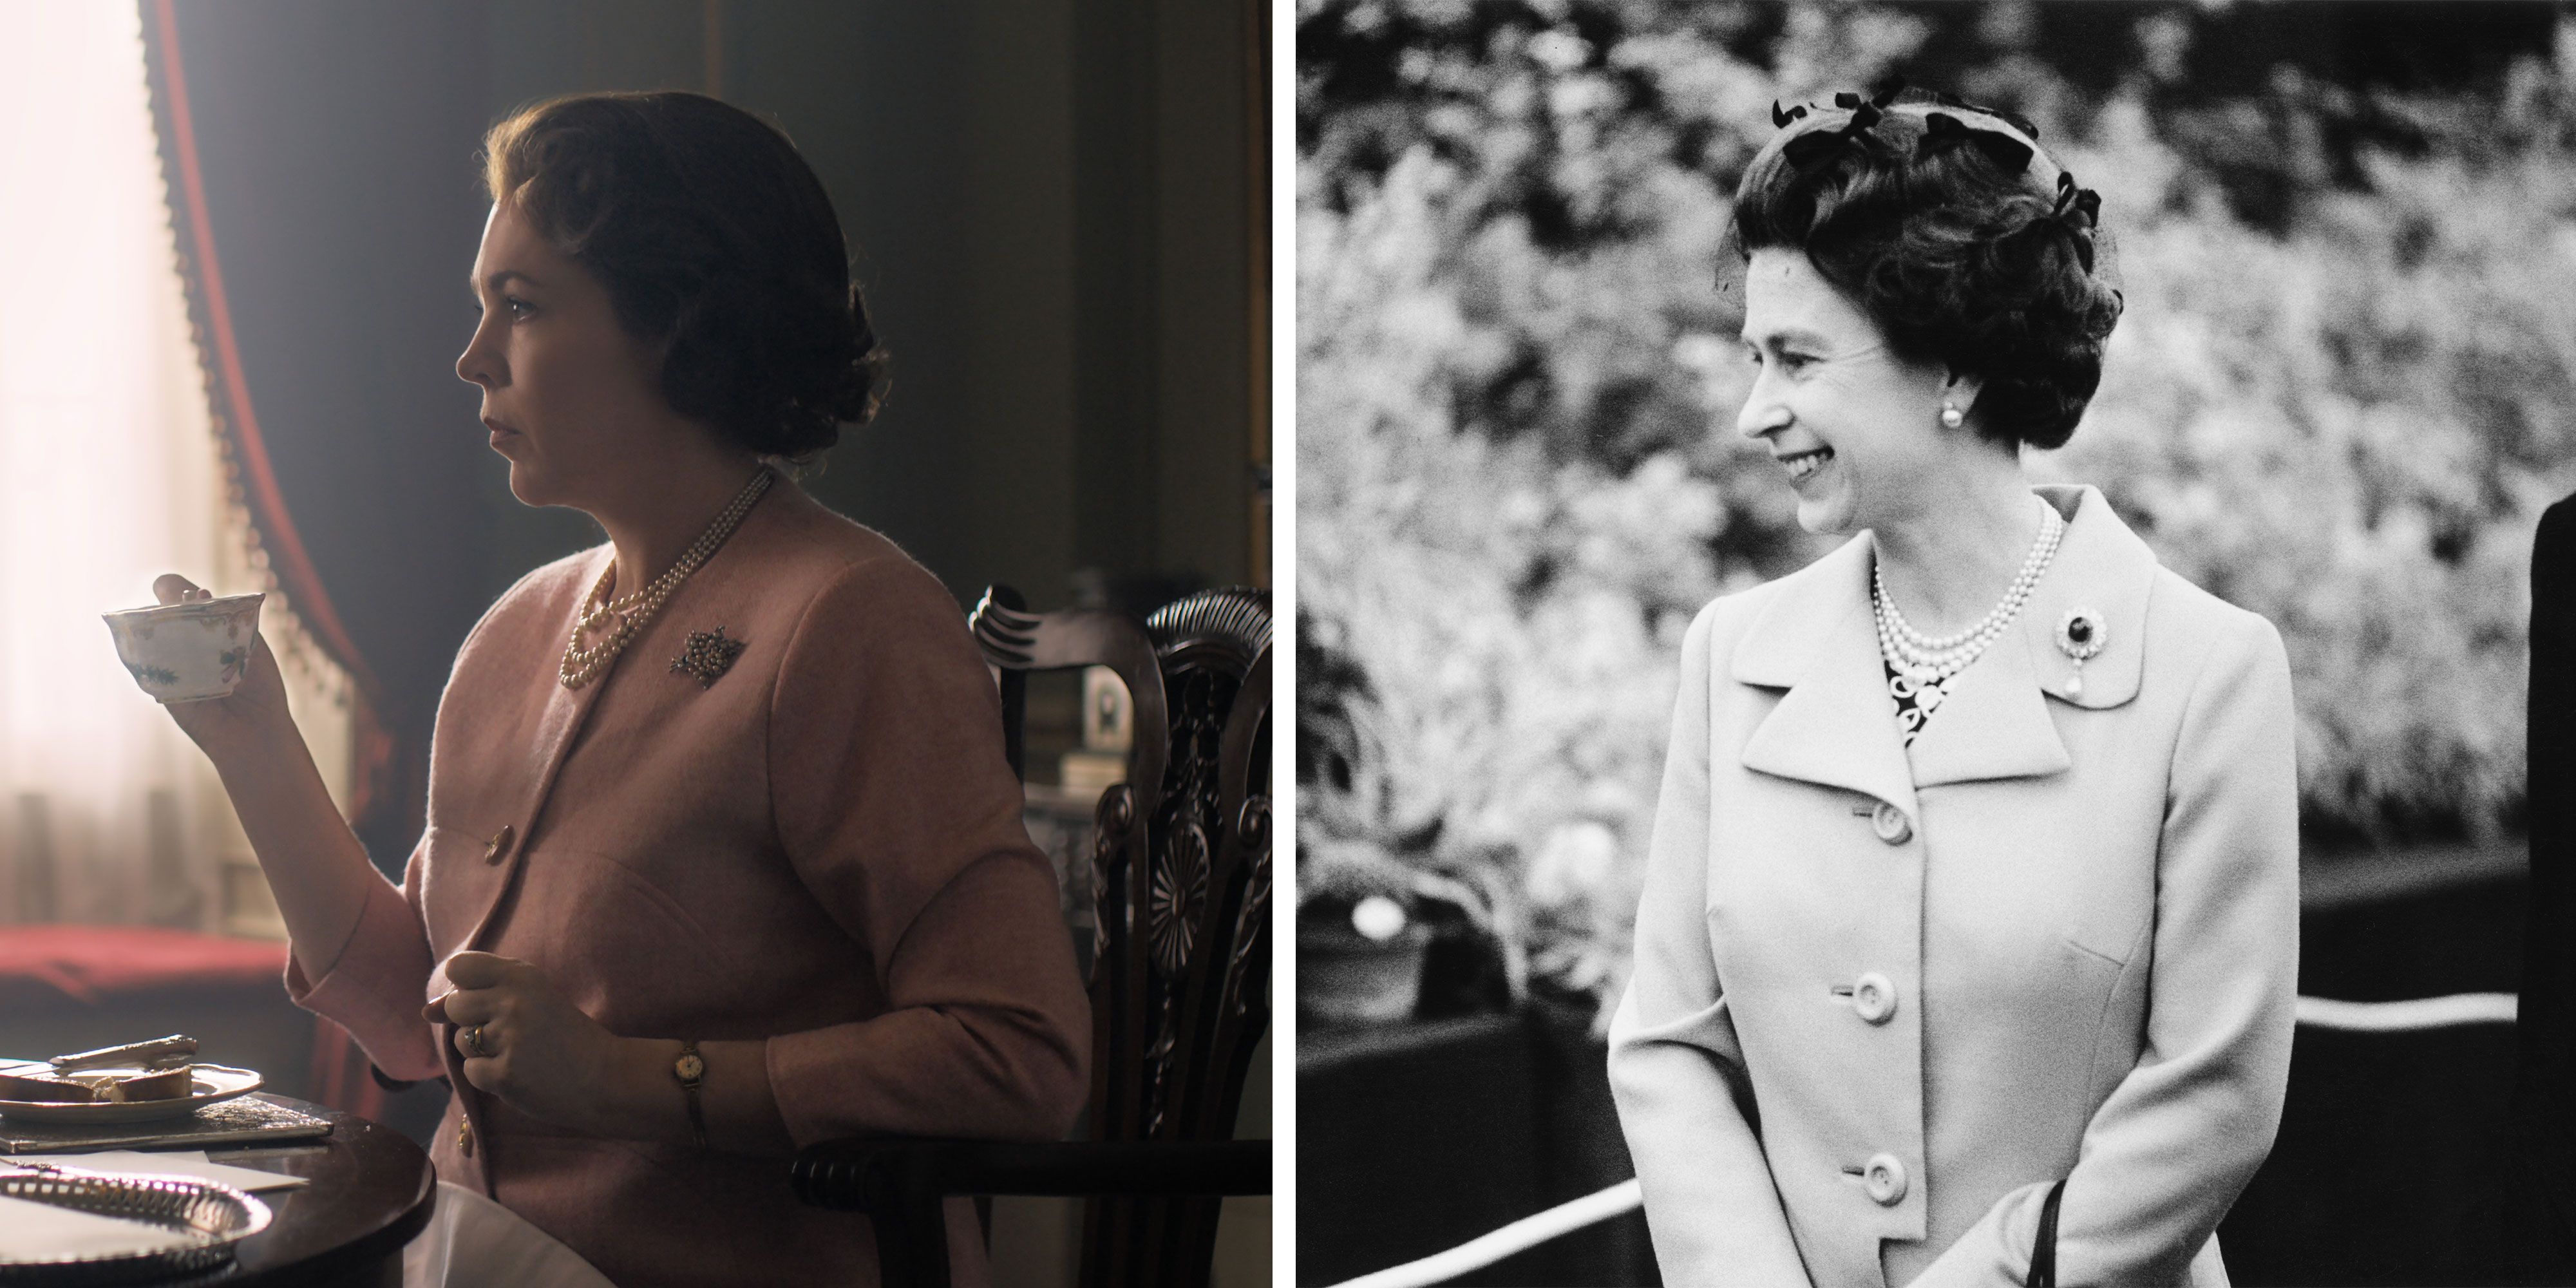 The Crown's Claire Foy and Olivia Colman Honor Queen Elizabeth II